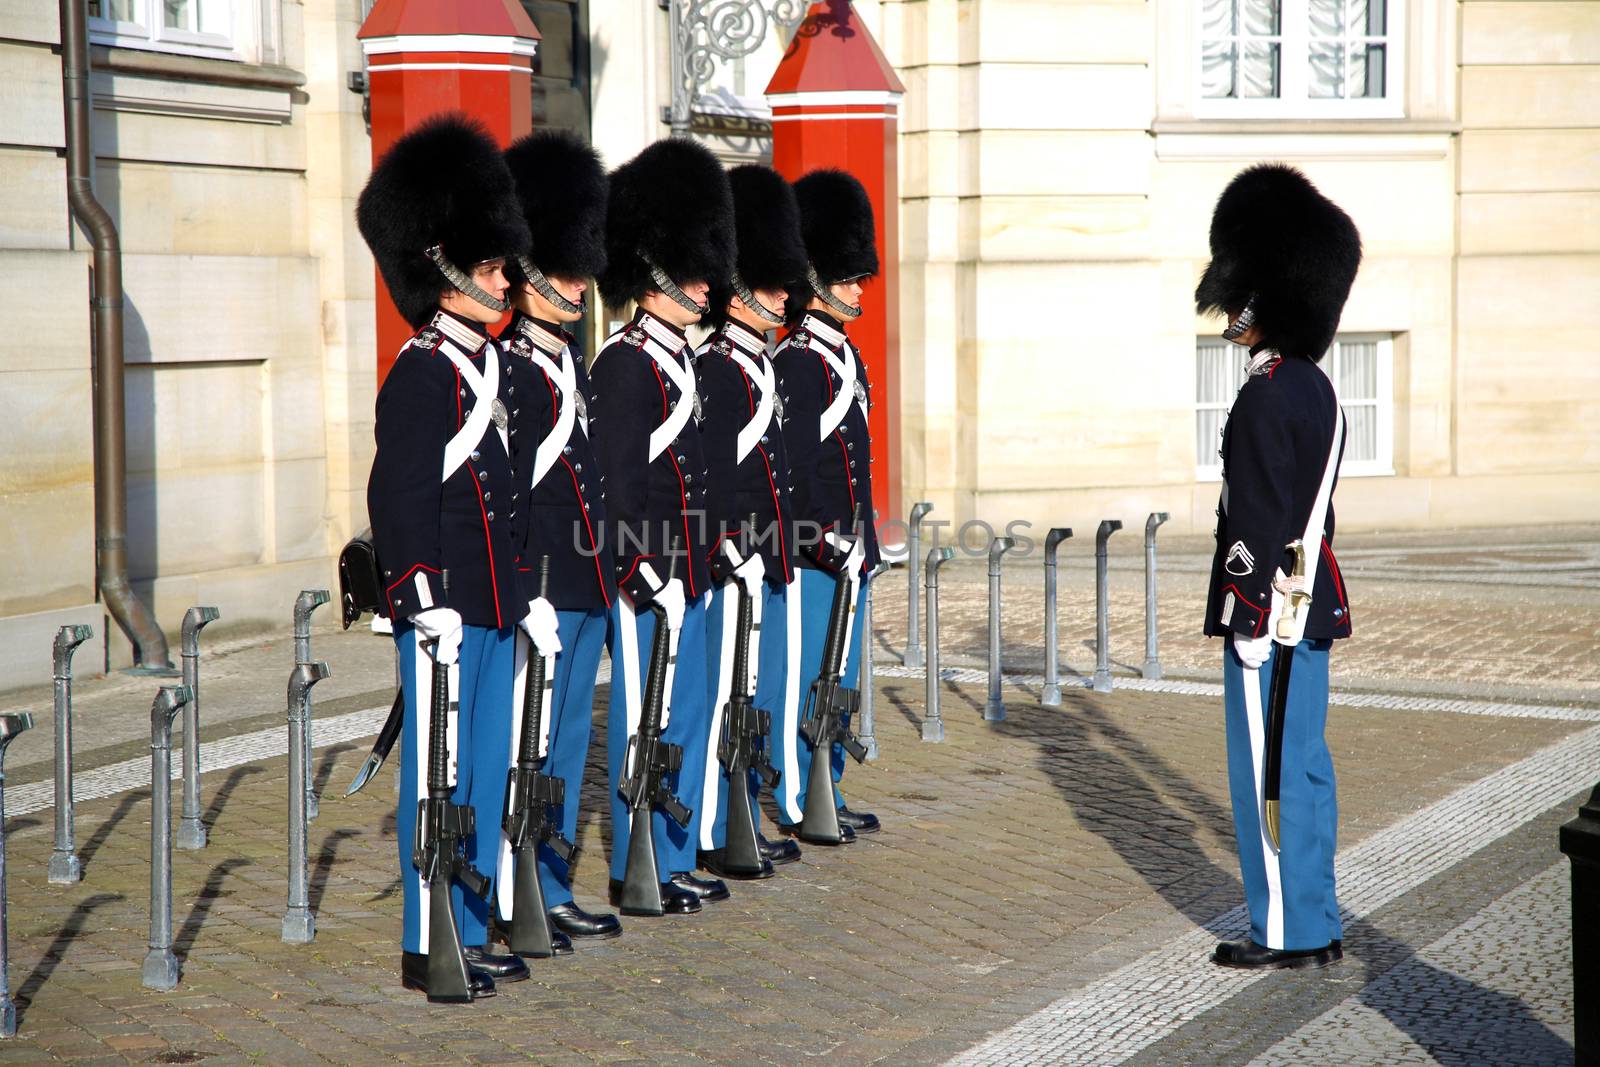 COPENHAGEN, DENMARK - AUGUST 15, 2016: Danish Royal Life Guards on the central plaza of Amalienborg palace, home of the Danish Royal family in Copenhagen, Denmark on August 15, 2016.